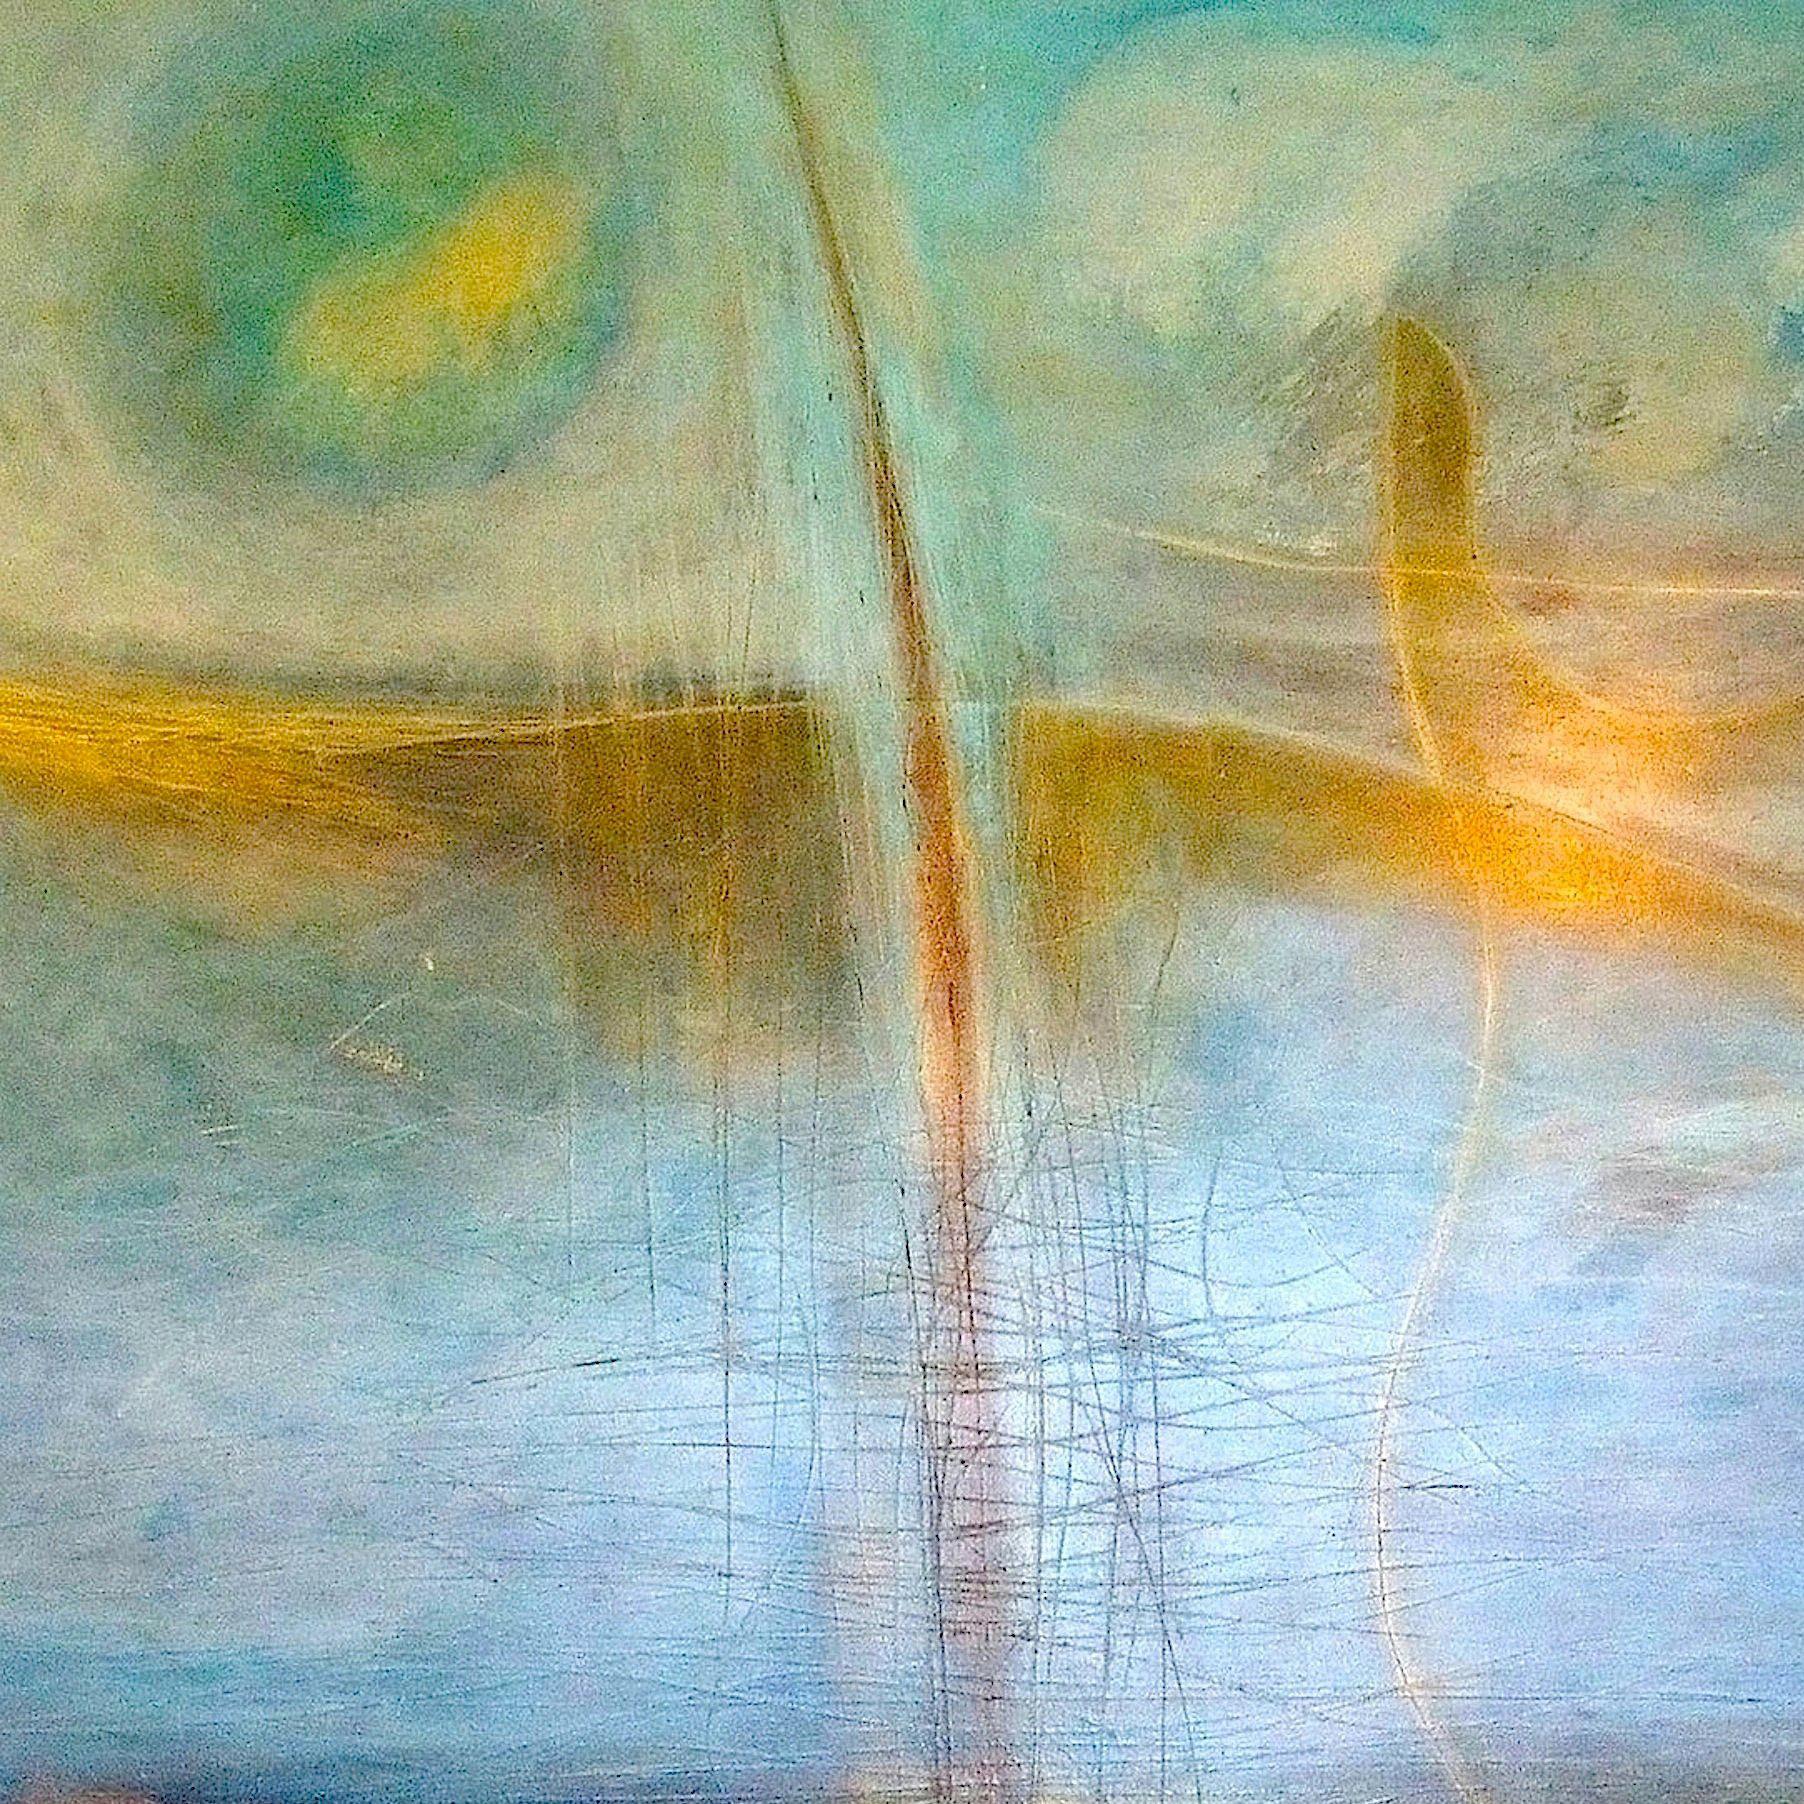 Lark Ascending - Abstract Expressionist Mixed Media Art by Patricia McParlin